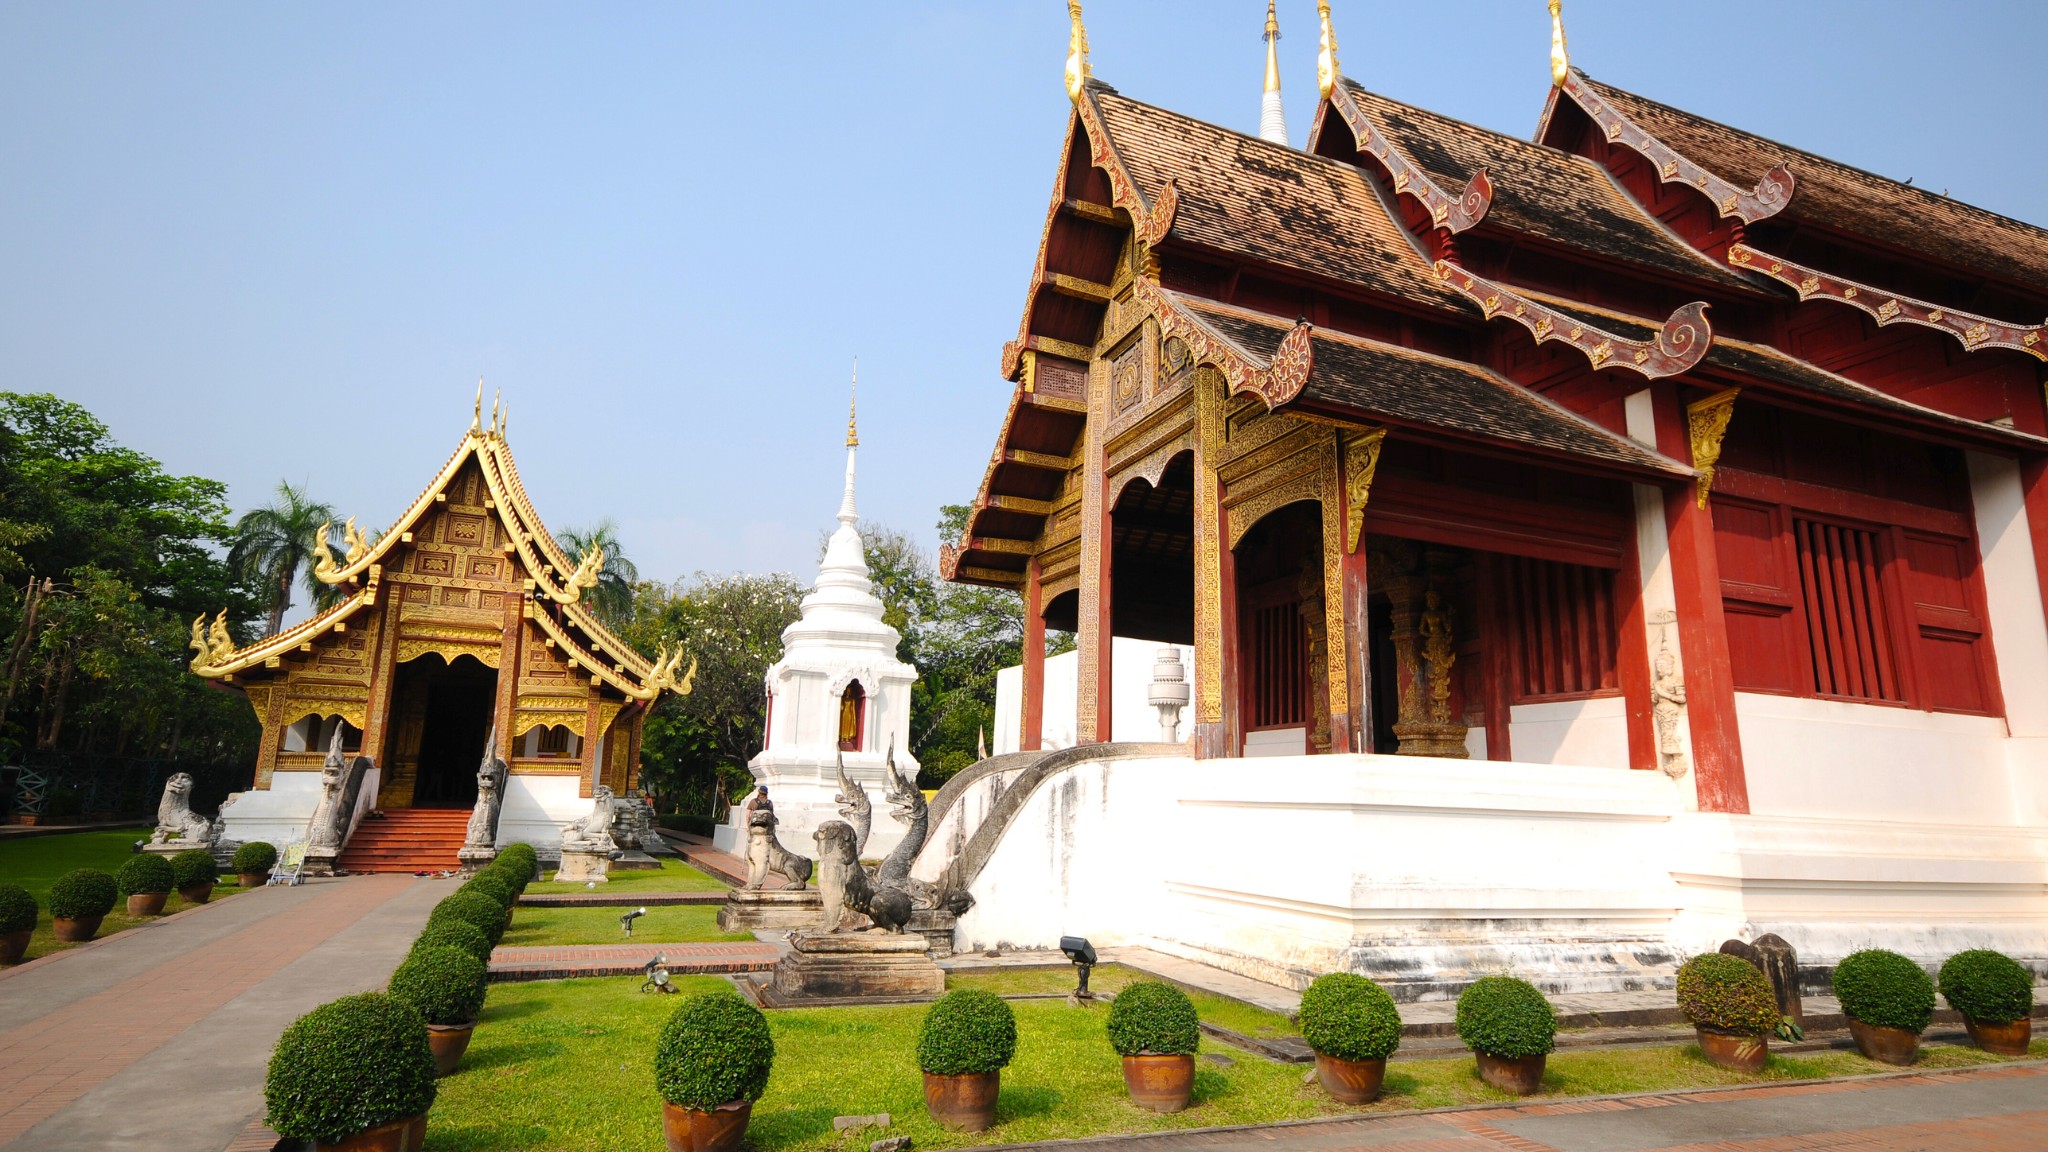 Day 9 Join a Fanstatic Chiang Mai Temples Tour